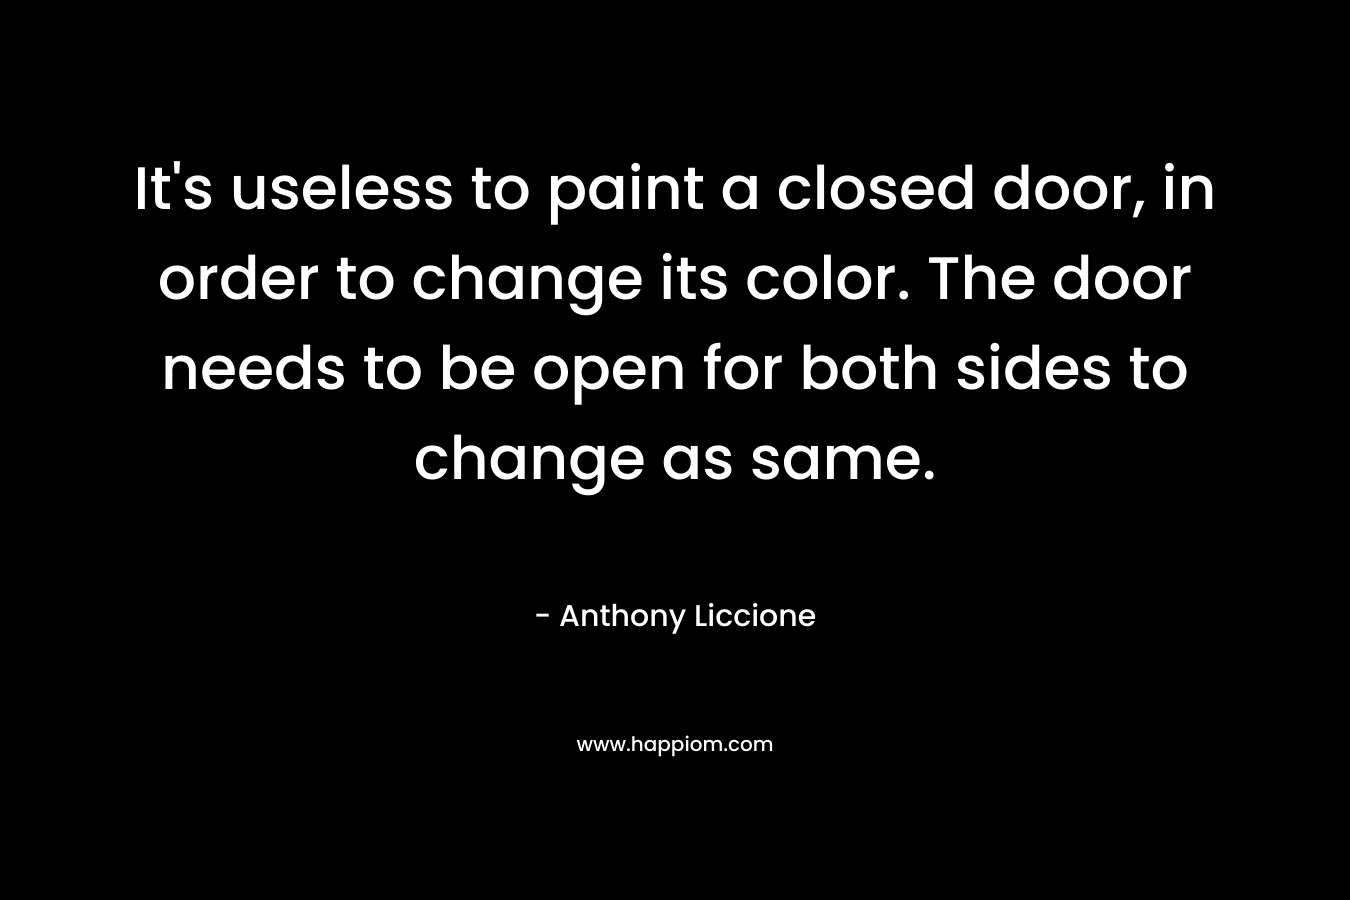 It's useless to paint a closed door, in order to change its color. The door needs to be open for both sides to change as same.